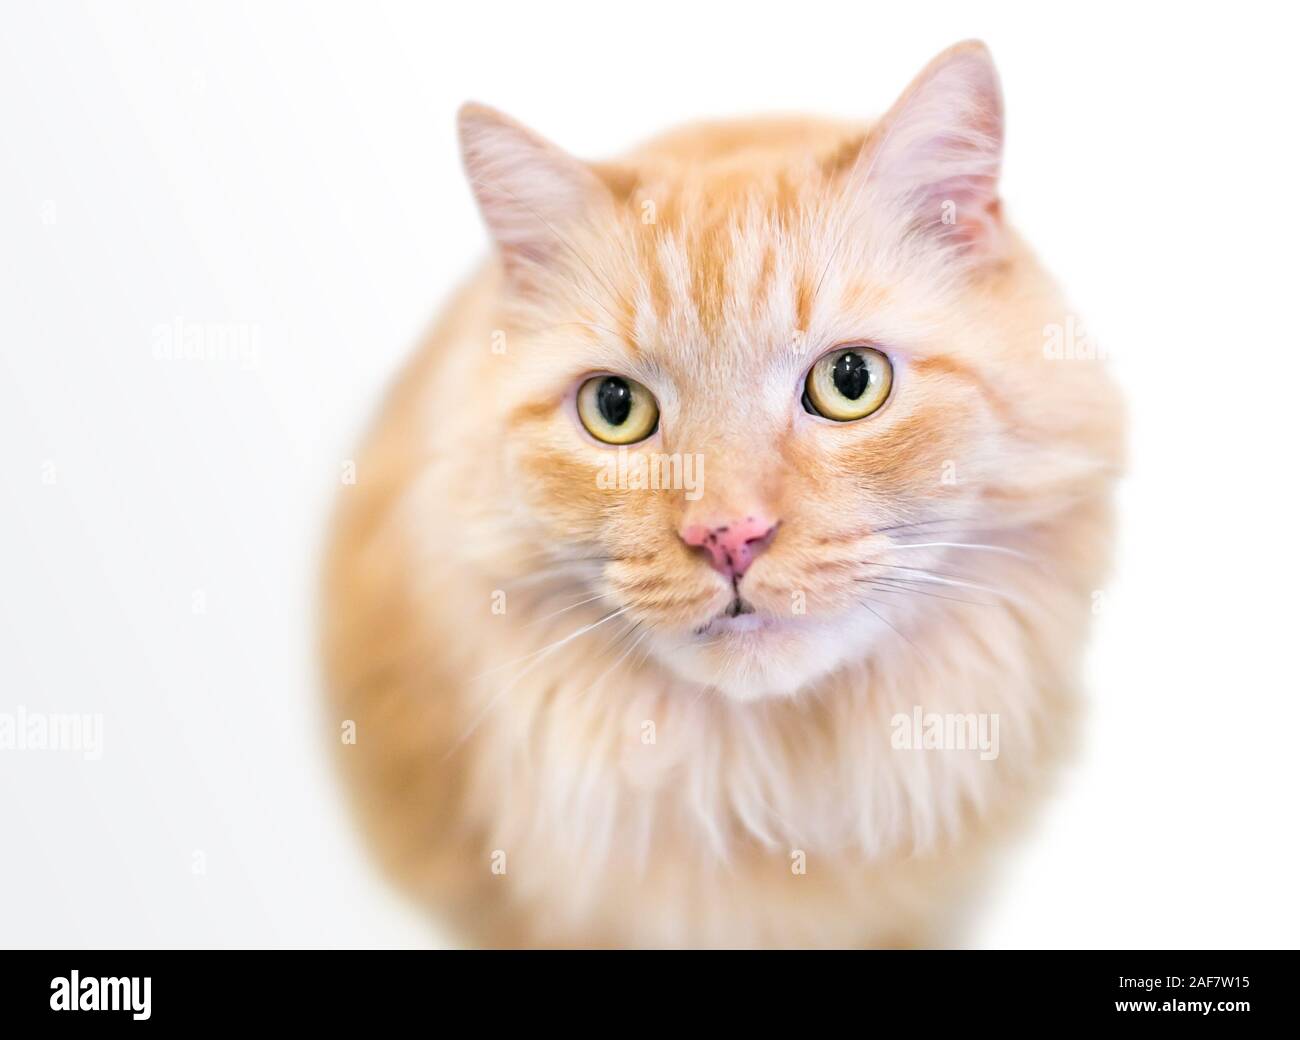 A fluffy orange tabby domestic longhair cat with freckles on its nose Stock Photo